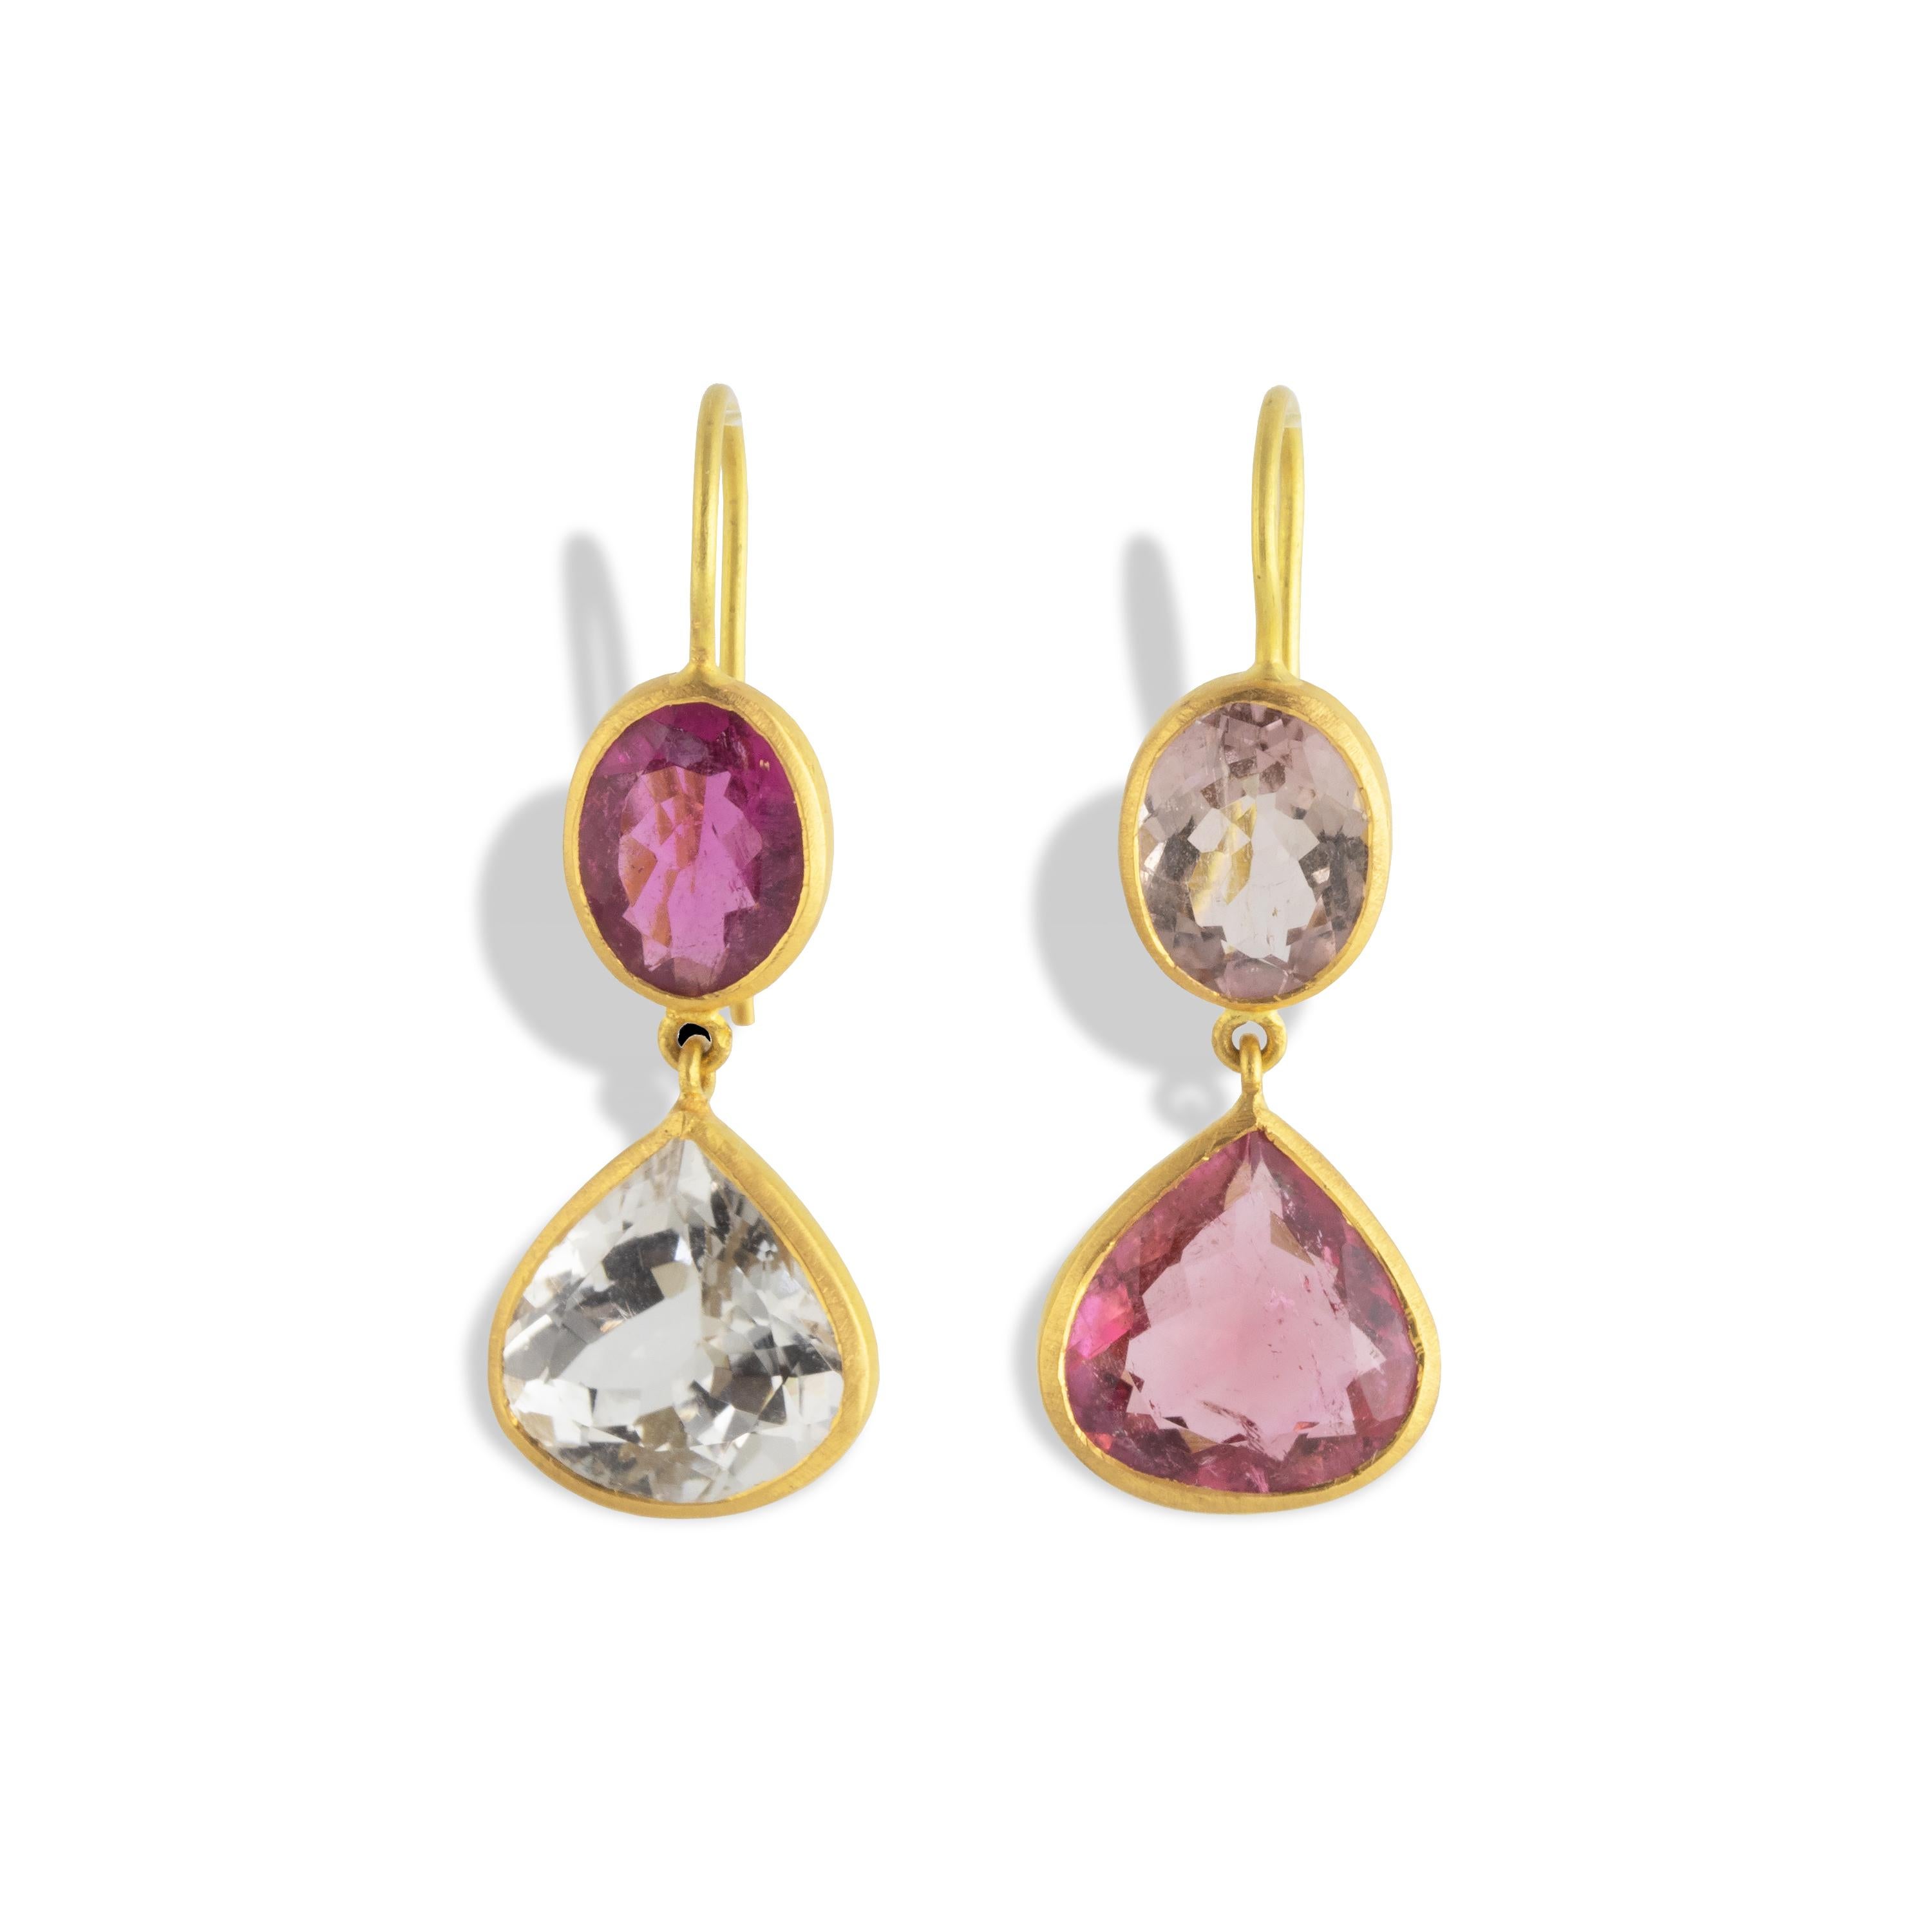 These 22k earrings are made with 8.88 carats of various shades of Pink Tourmaline.  One earring features a rubellite pink tourmaline oval with a light, brownish pink pear shaped drop.  The other earring compliments with an oval light light, brownish